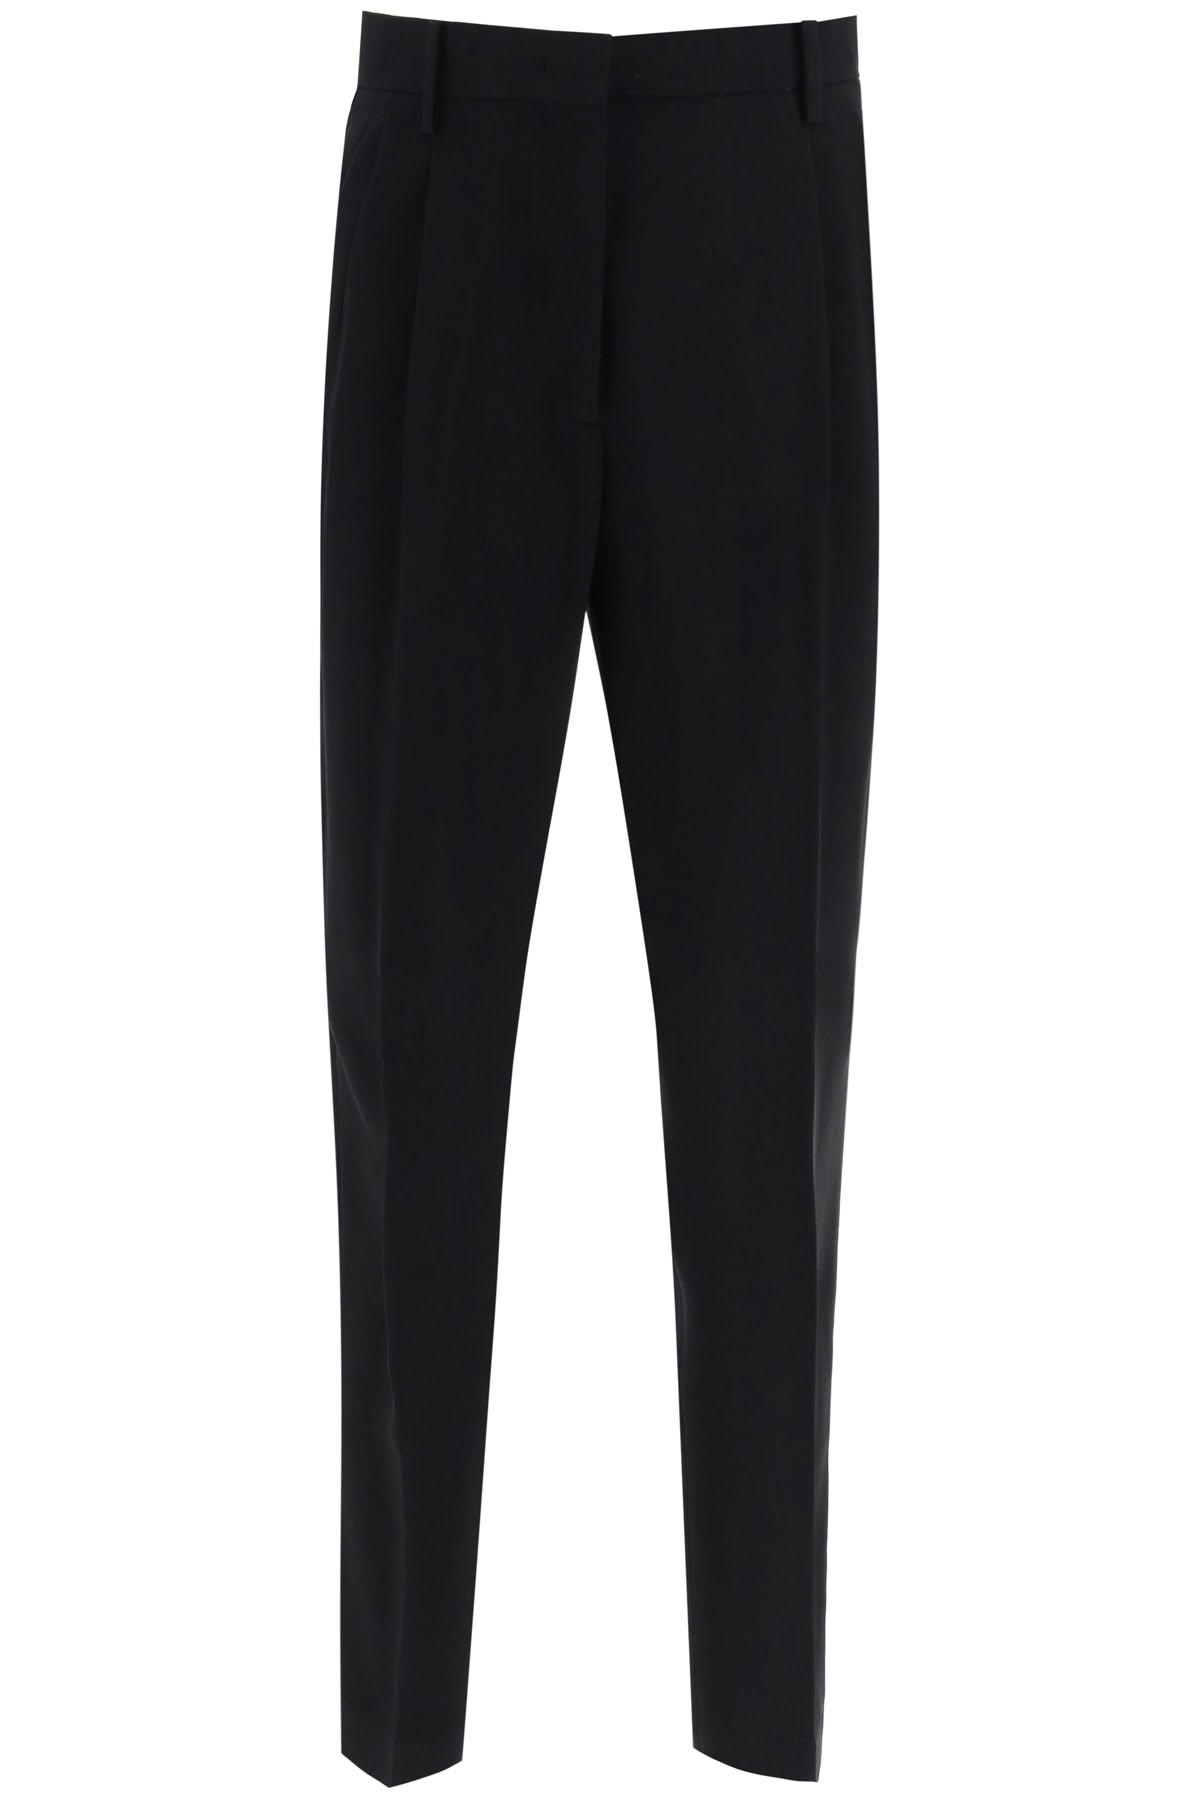 N.21 Cropped Classic Trousers